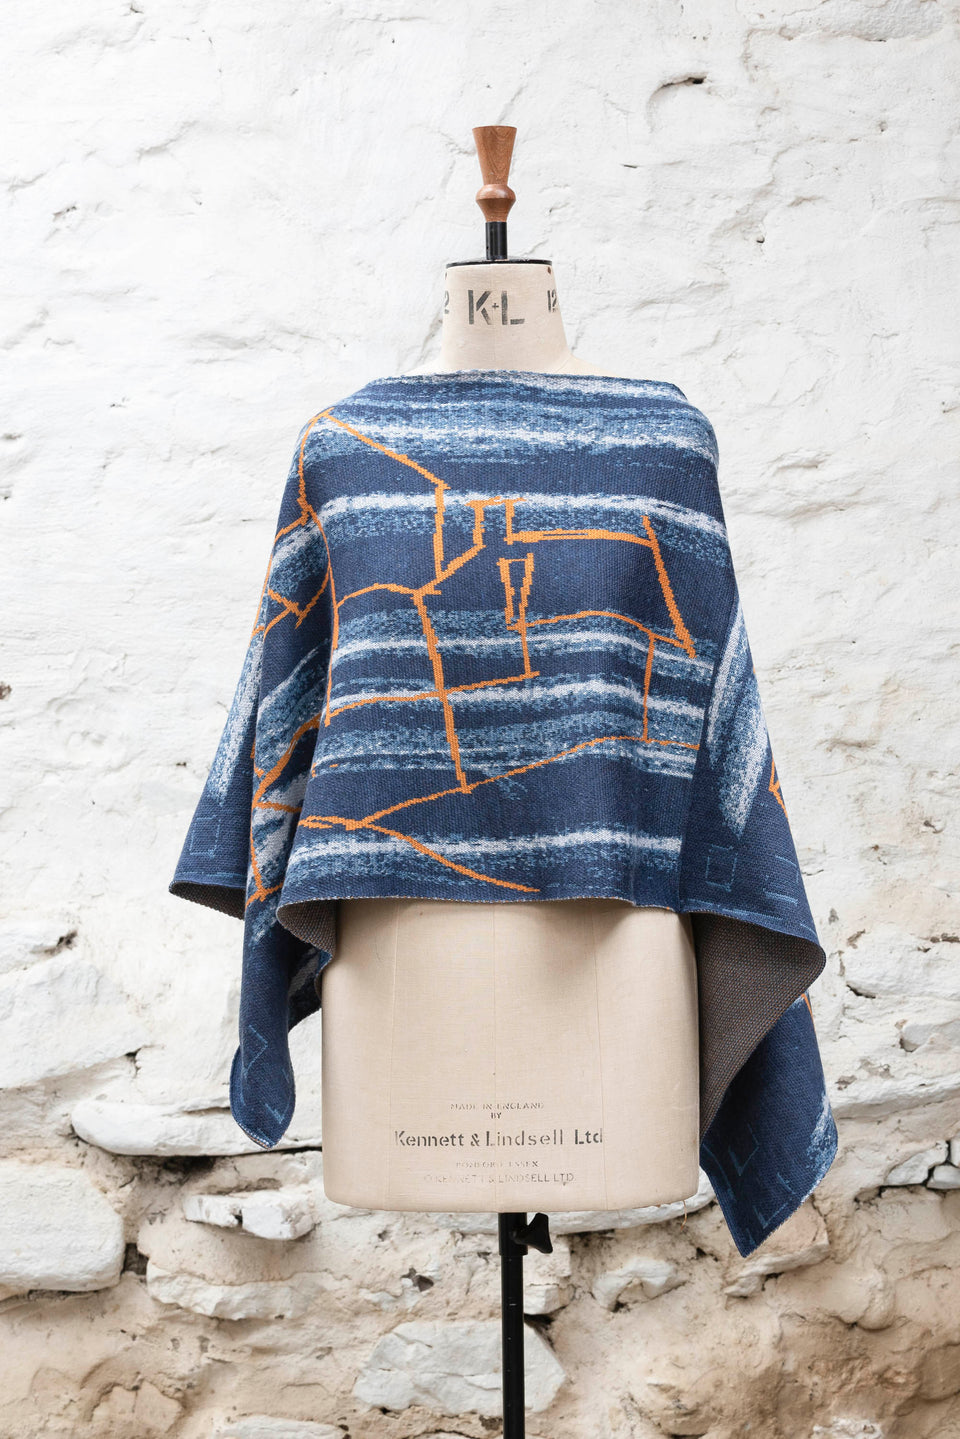 A knitted poncho, made in Shetland in a contemporary design by Nielanell with abstract blues and orange linear marks. Shown front on, with sides flowing down, on a vintage mannequin against a rustic white washed wall